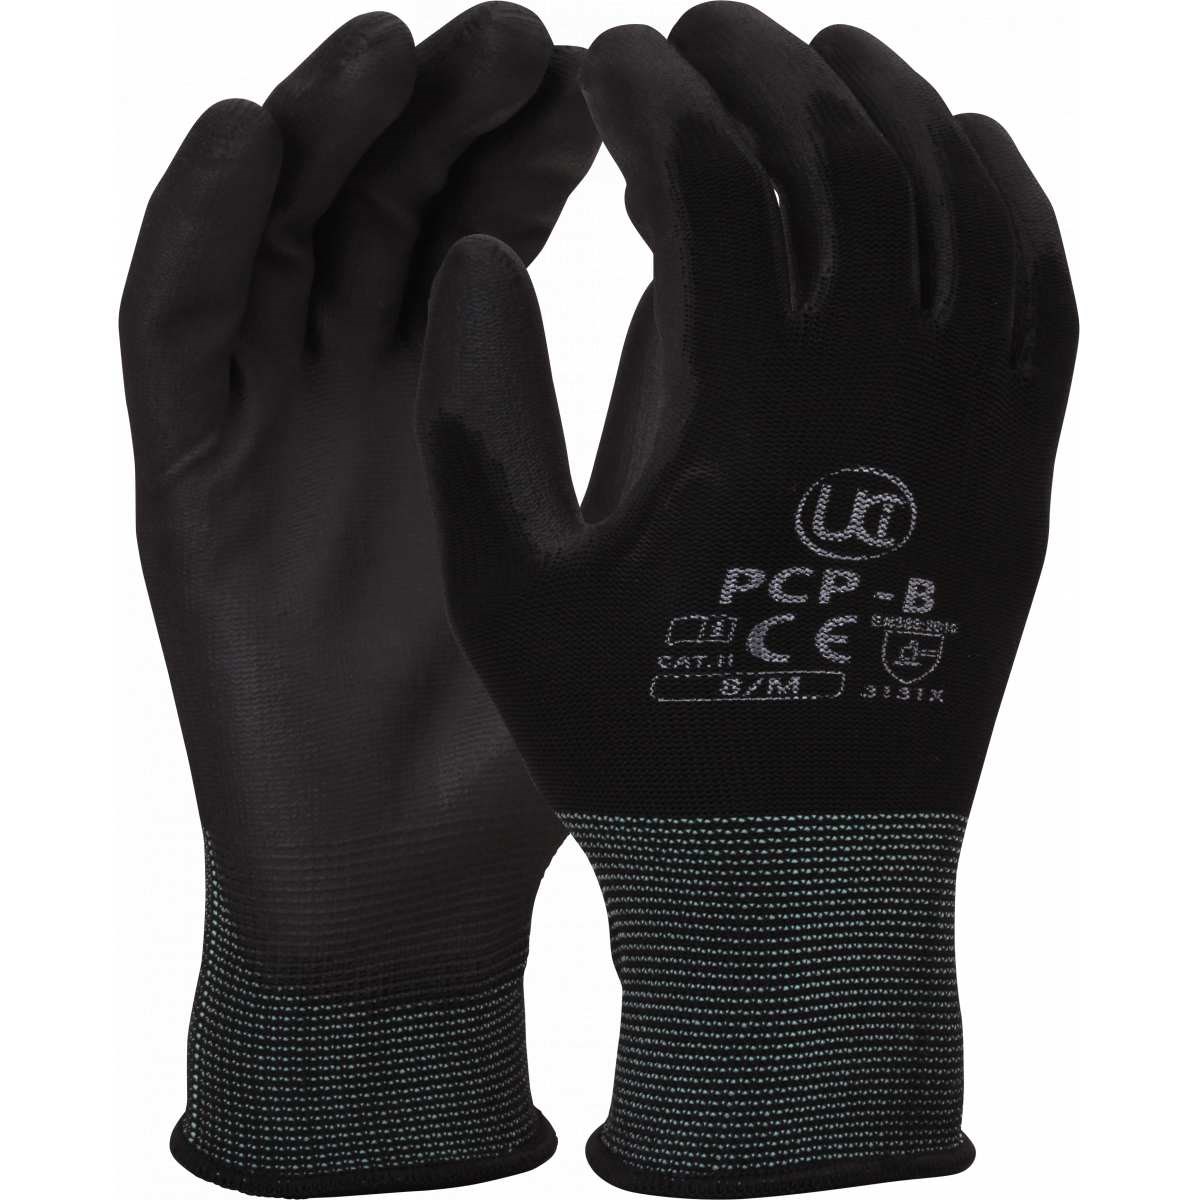 50 Pairs Of UCI PCP-G GREY PU Precise Palm Coated Safety Work Gloves Size 8 